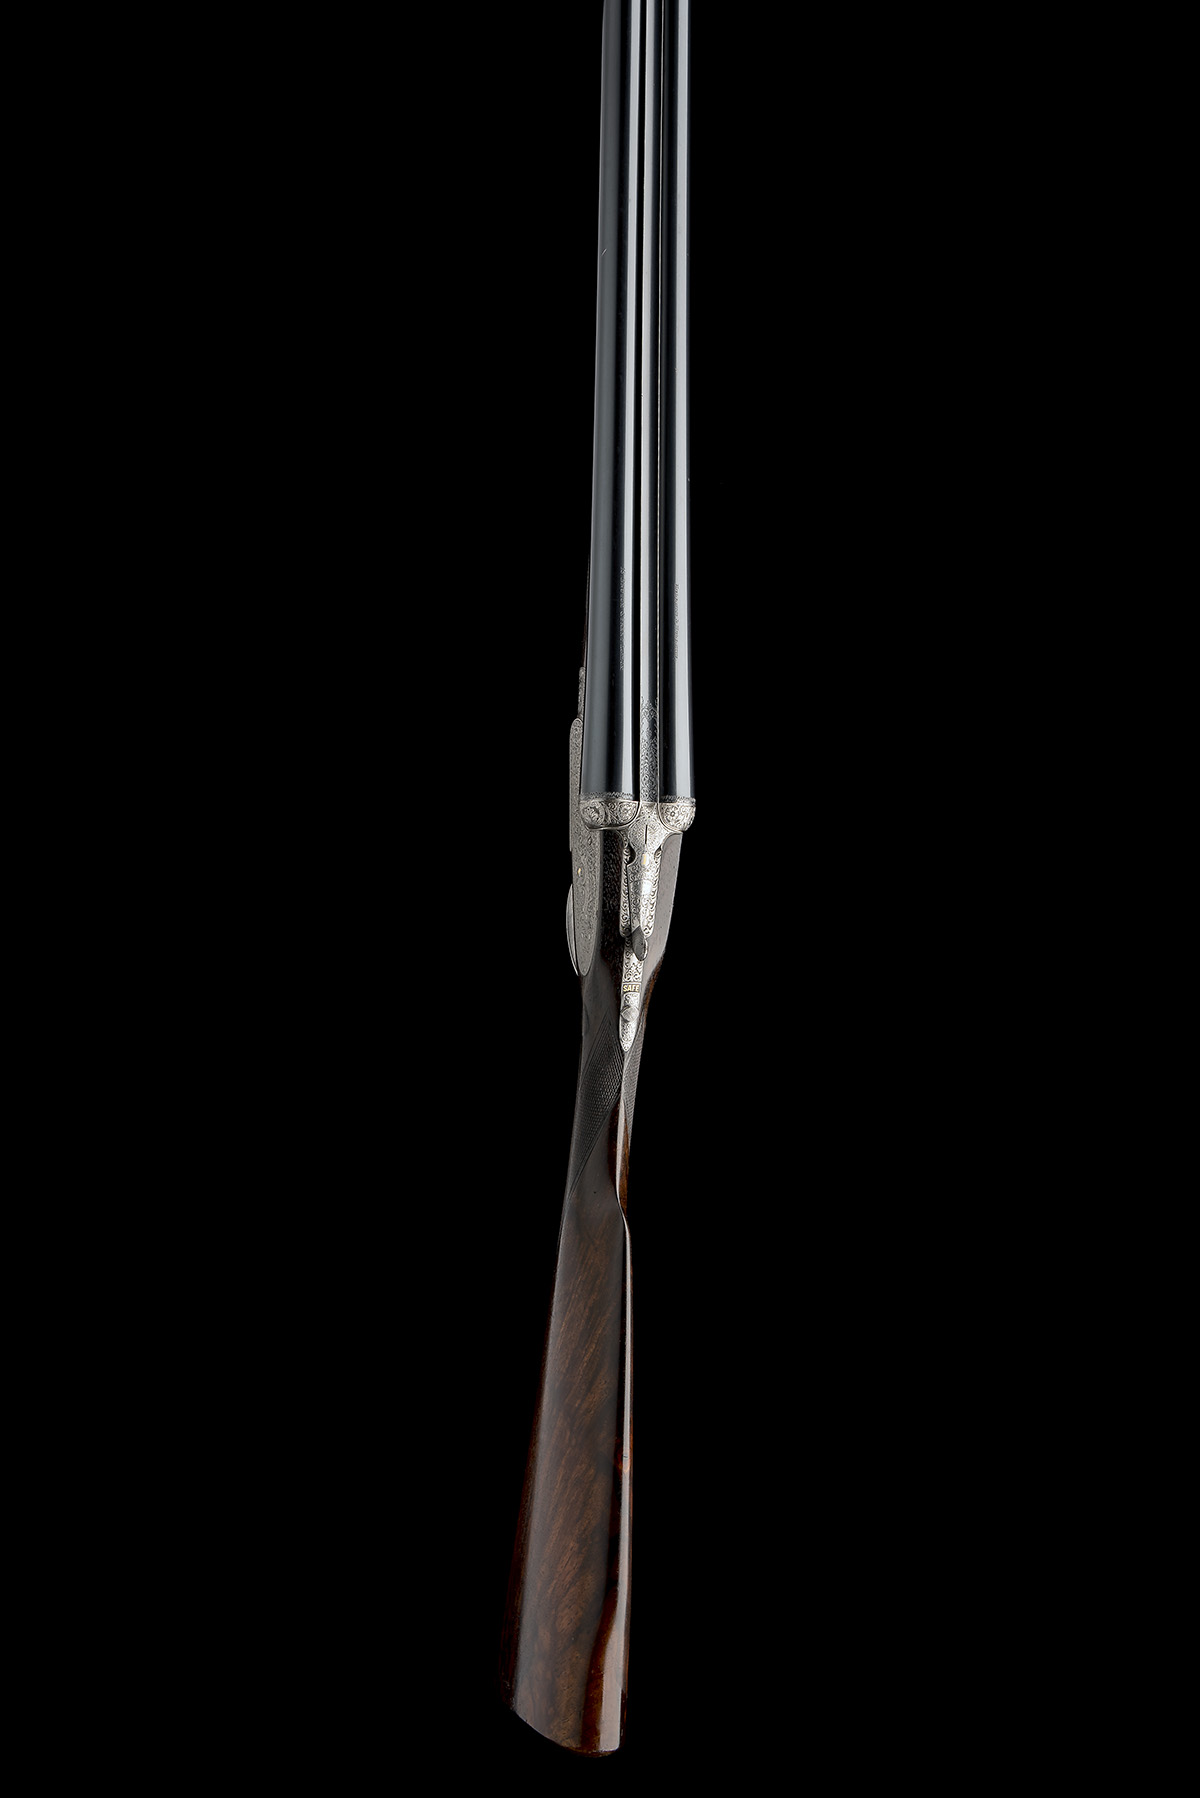 HOLLAND & HOLLAND A 12-BORE 'ROYAL' SINGLE-TRIGGER SIDELOCK EJECTOR, serial no. 23627, for 1905, - Image 10 of 12